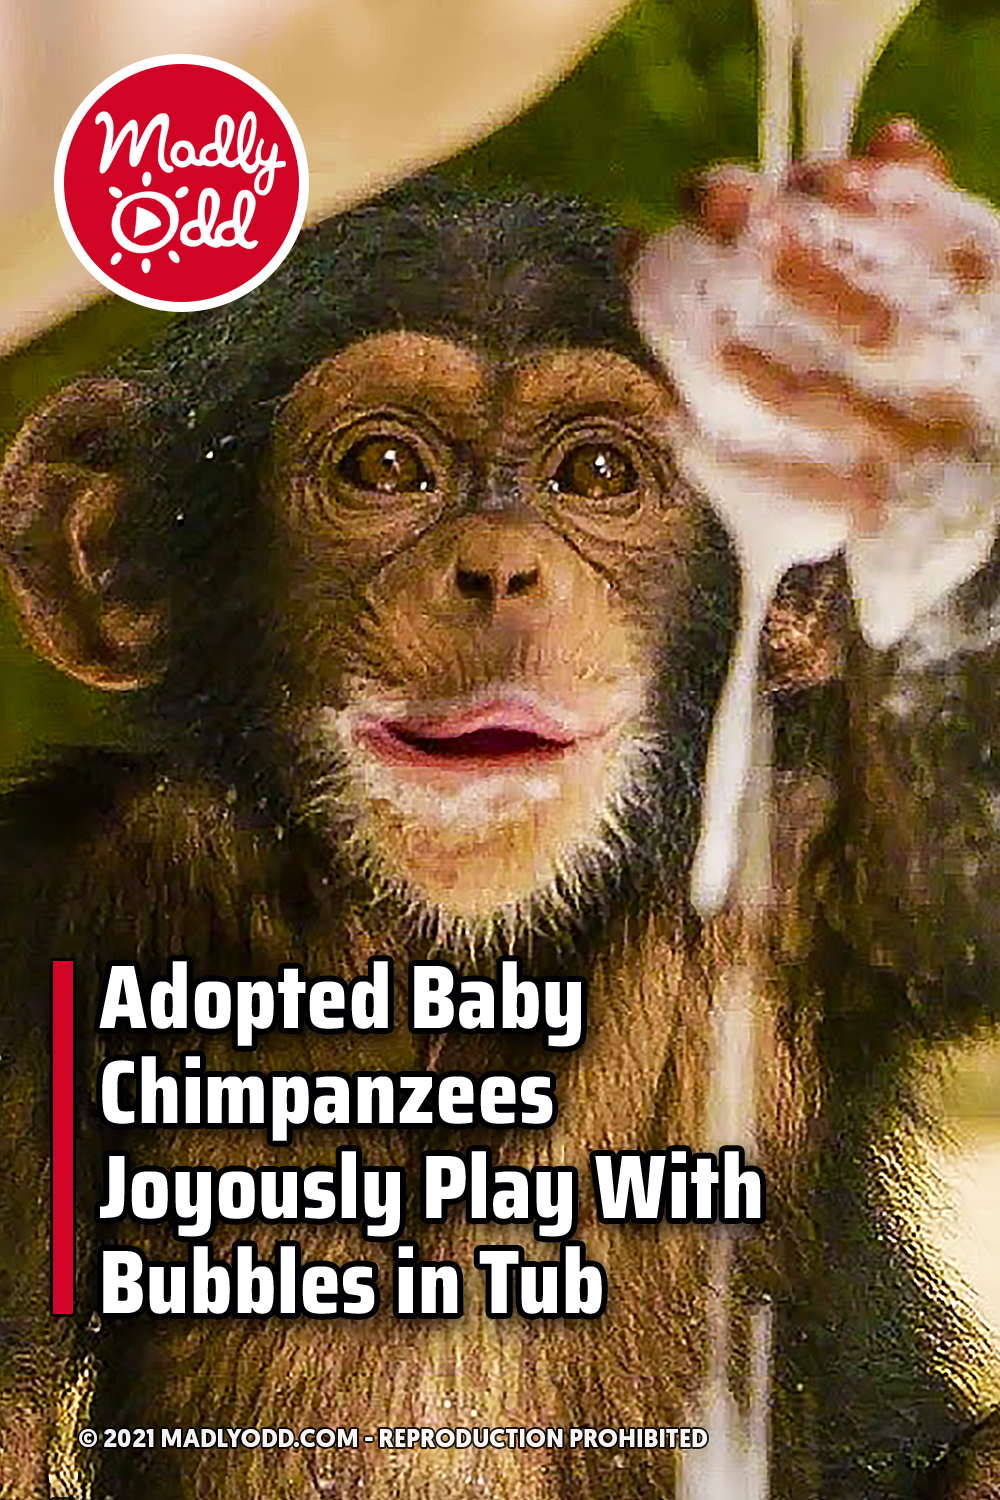 Adopted Baby Chimpanzees Joyously Play With Bubbles in Tub